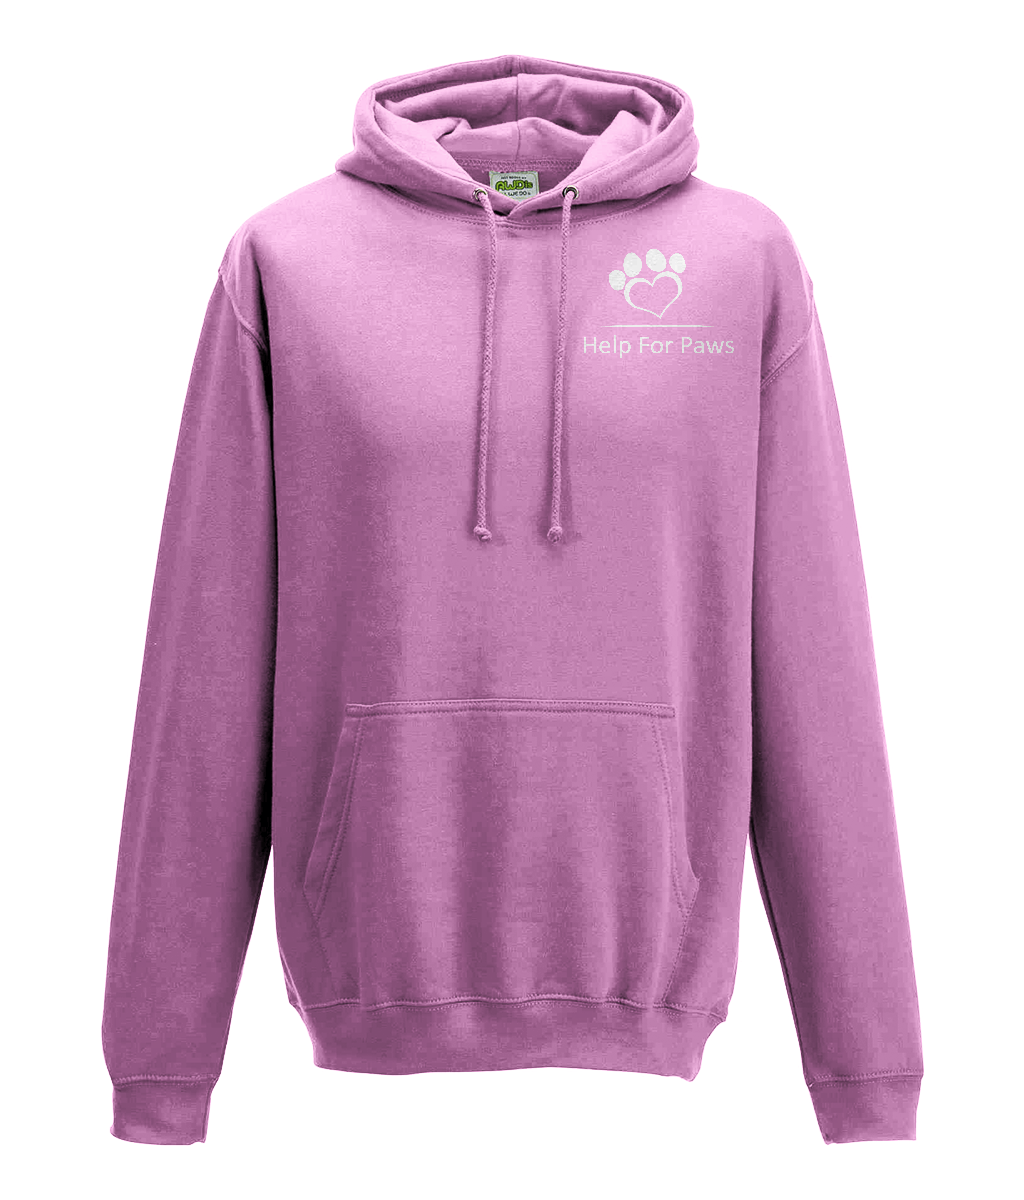 Suggested Products - Help For Paws Pink Hoodie